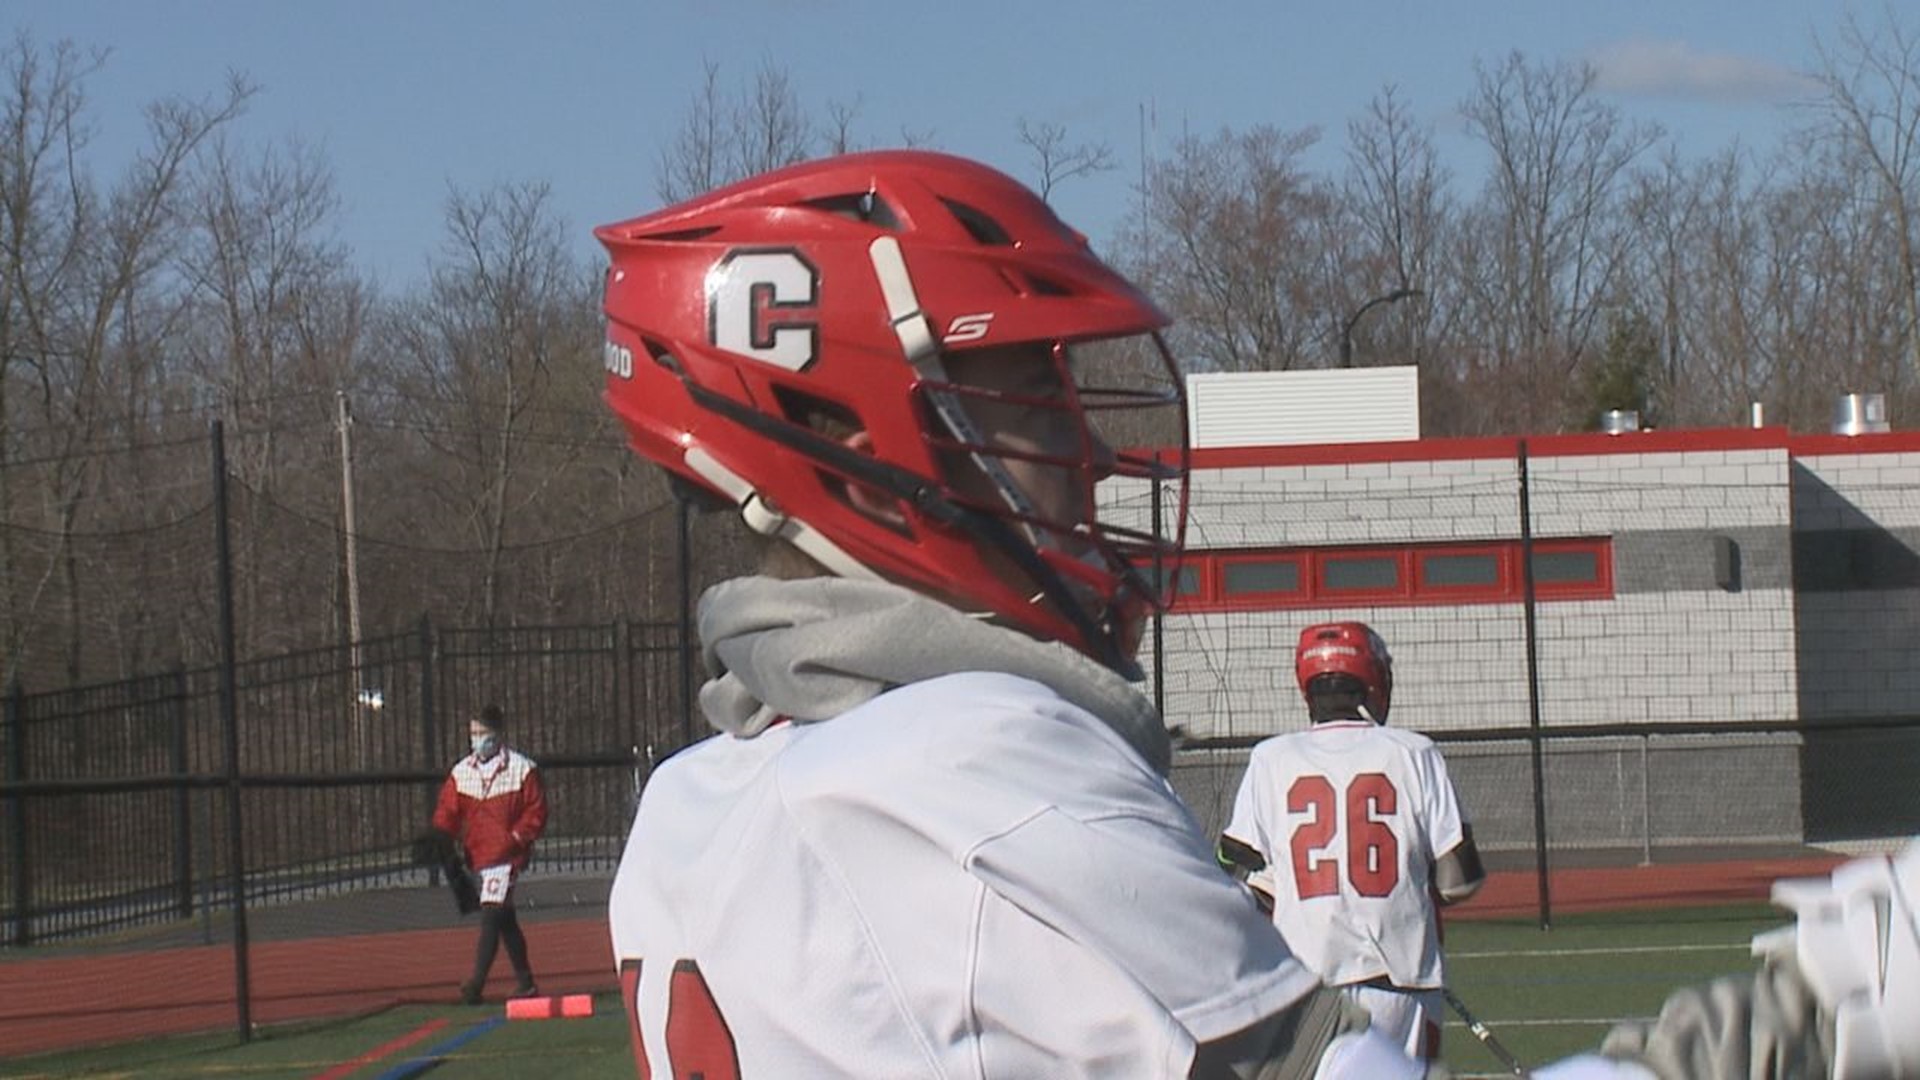 The Comets and the Tigers in boy's lacrosse action